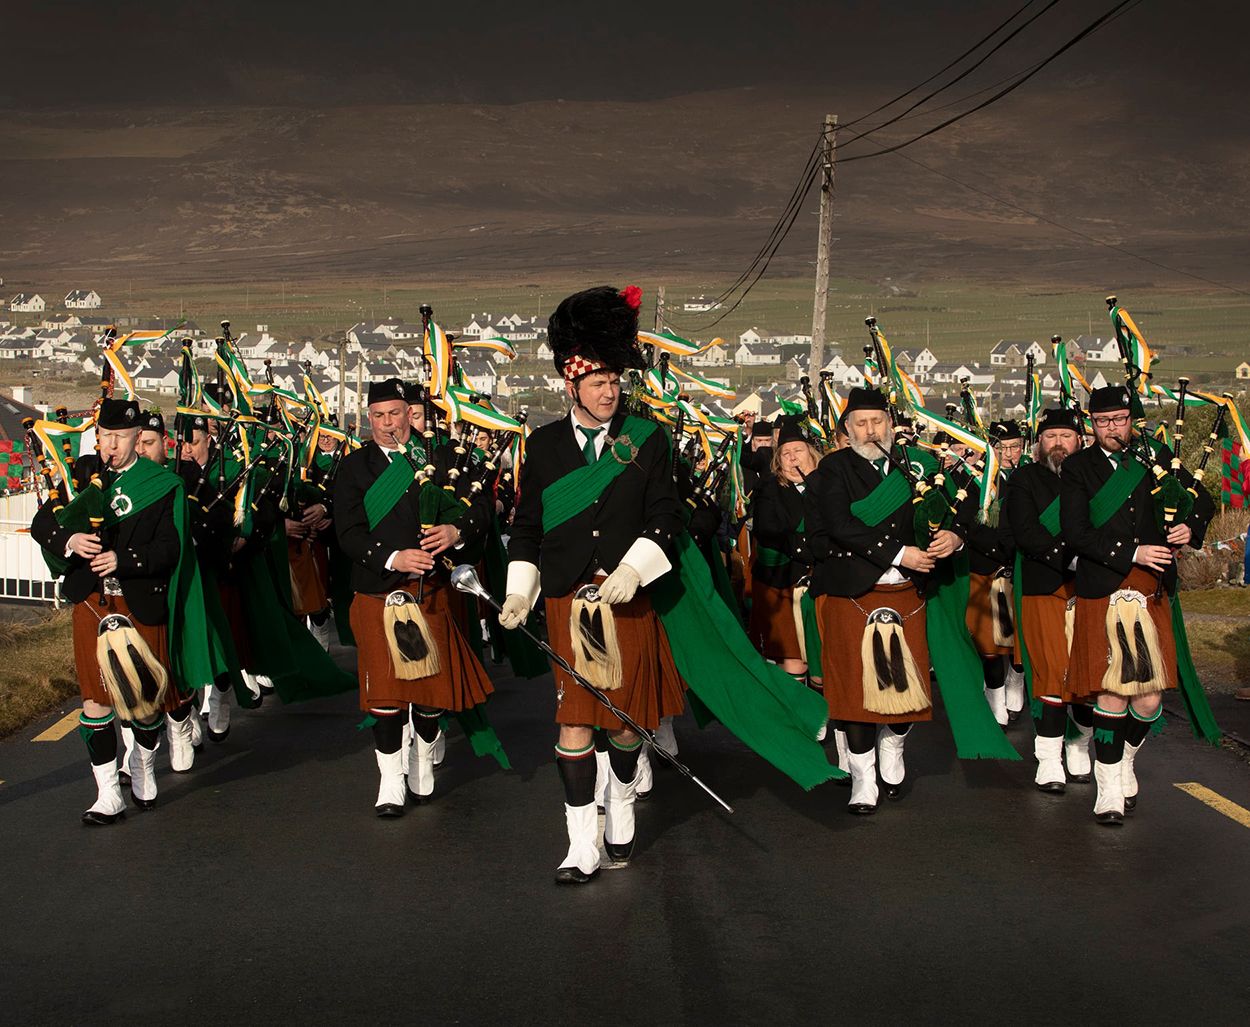 On the March,Dooagh Pipe Band, Saint Patrick's Day, Achill Island, Ireland 